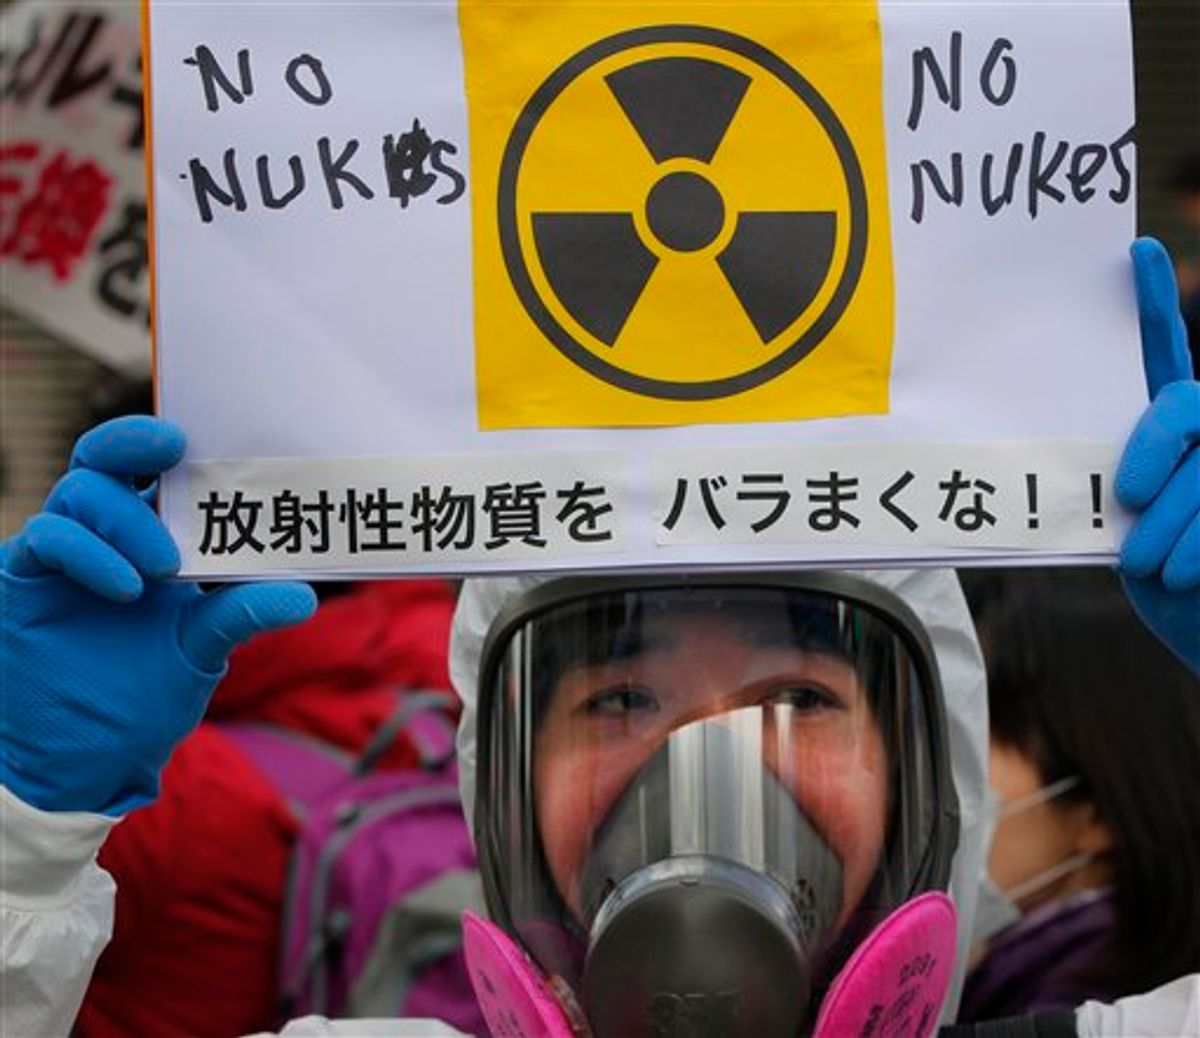 A protester in protective mask holds a placard during an anti nuclear rally in Tokyo, Sunday, March 27, 2011. Leaked water in Unit 2 of the Fukushima Dai-ichi plant measured 10 million times higher than usual radioactivity levels when the reactor is operating normally, Tokyo Electric Power Co. spokesman Takashi Kurita told reporters in Tokyo. The placard has a message that reads "Don't spread radioactive substance." (AP Photo/Itsuo Inouye) (AP)